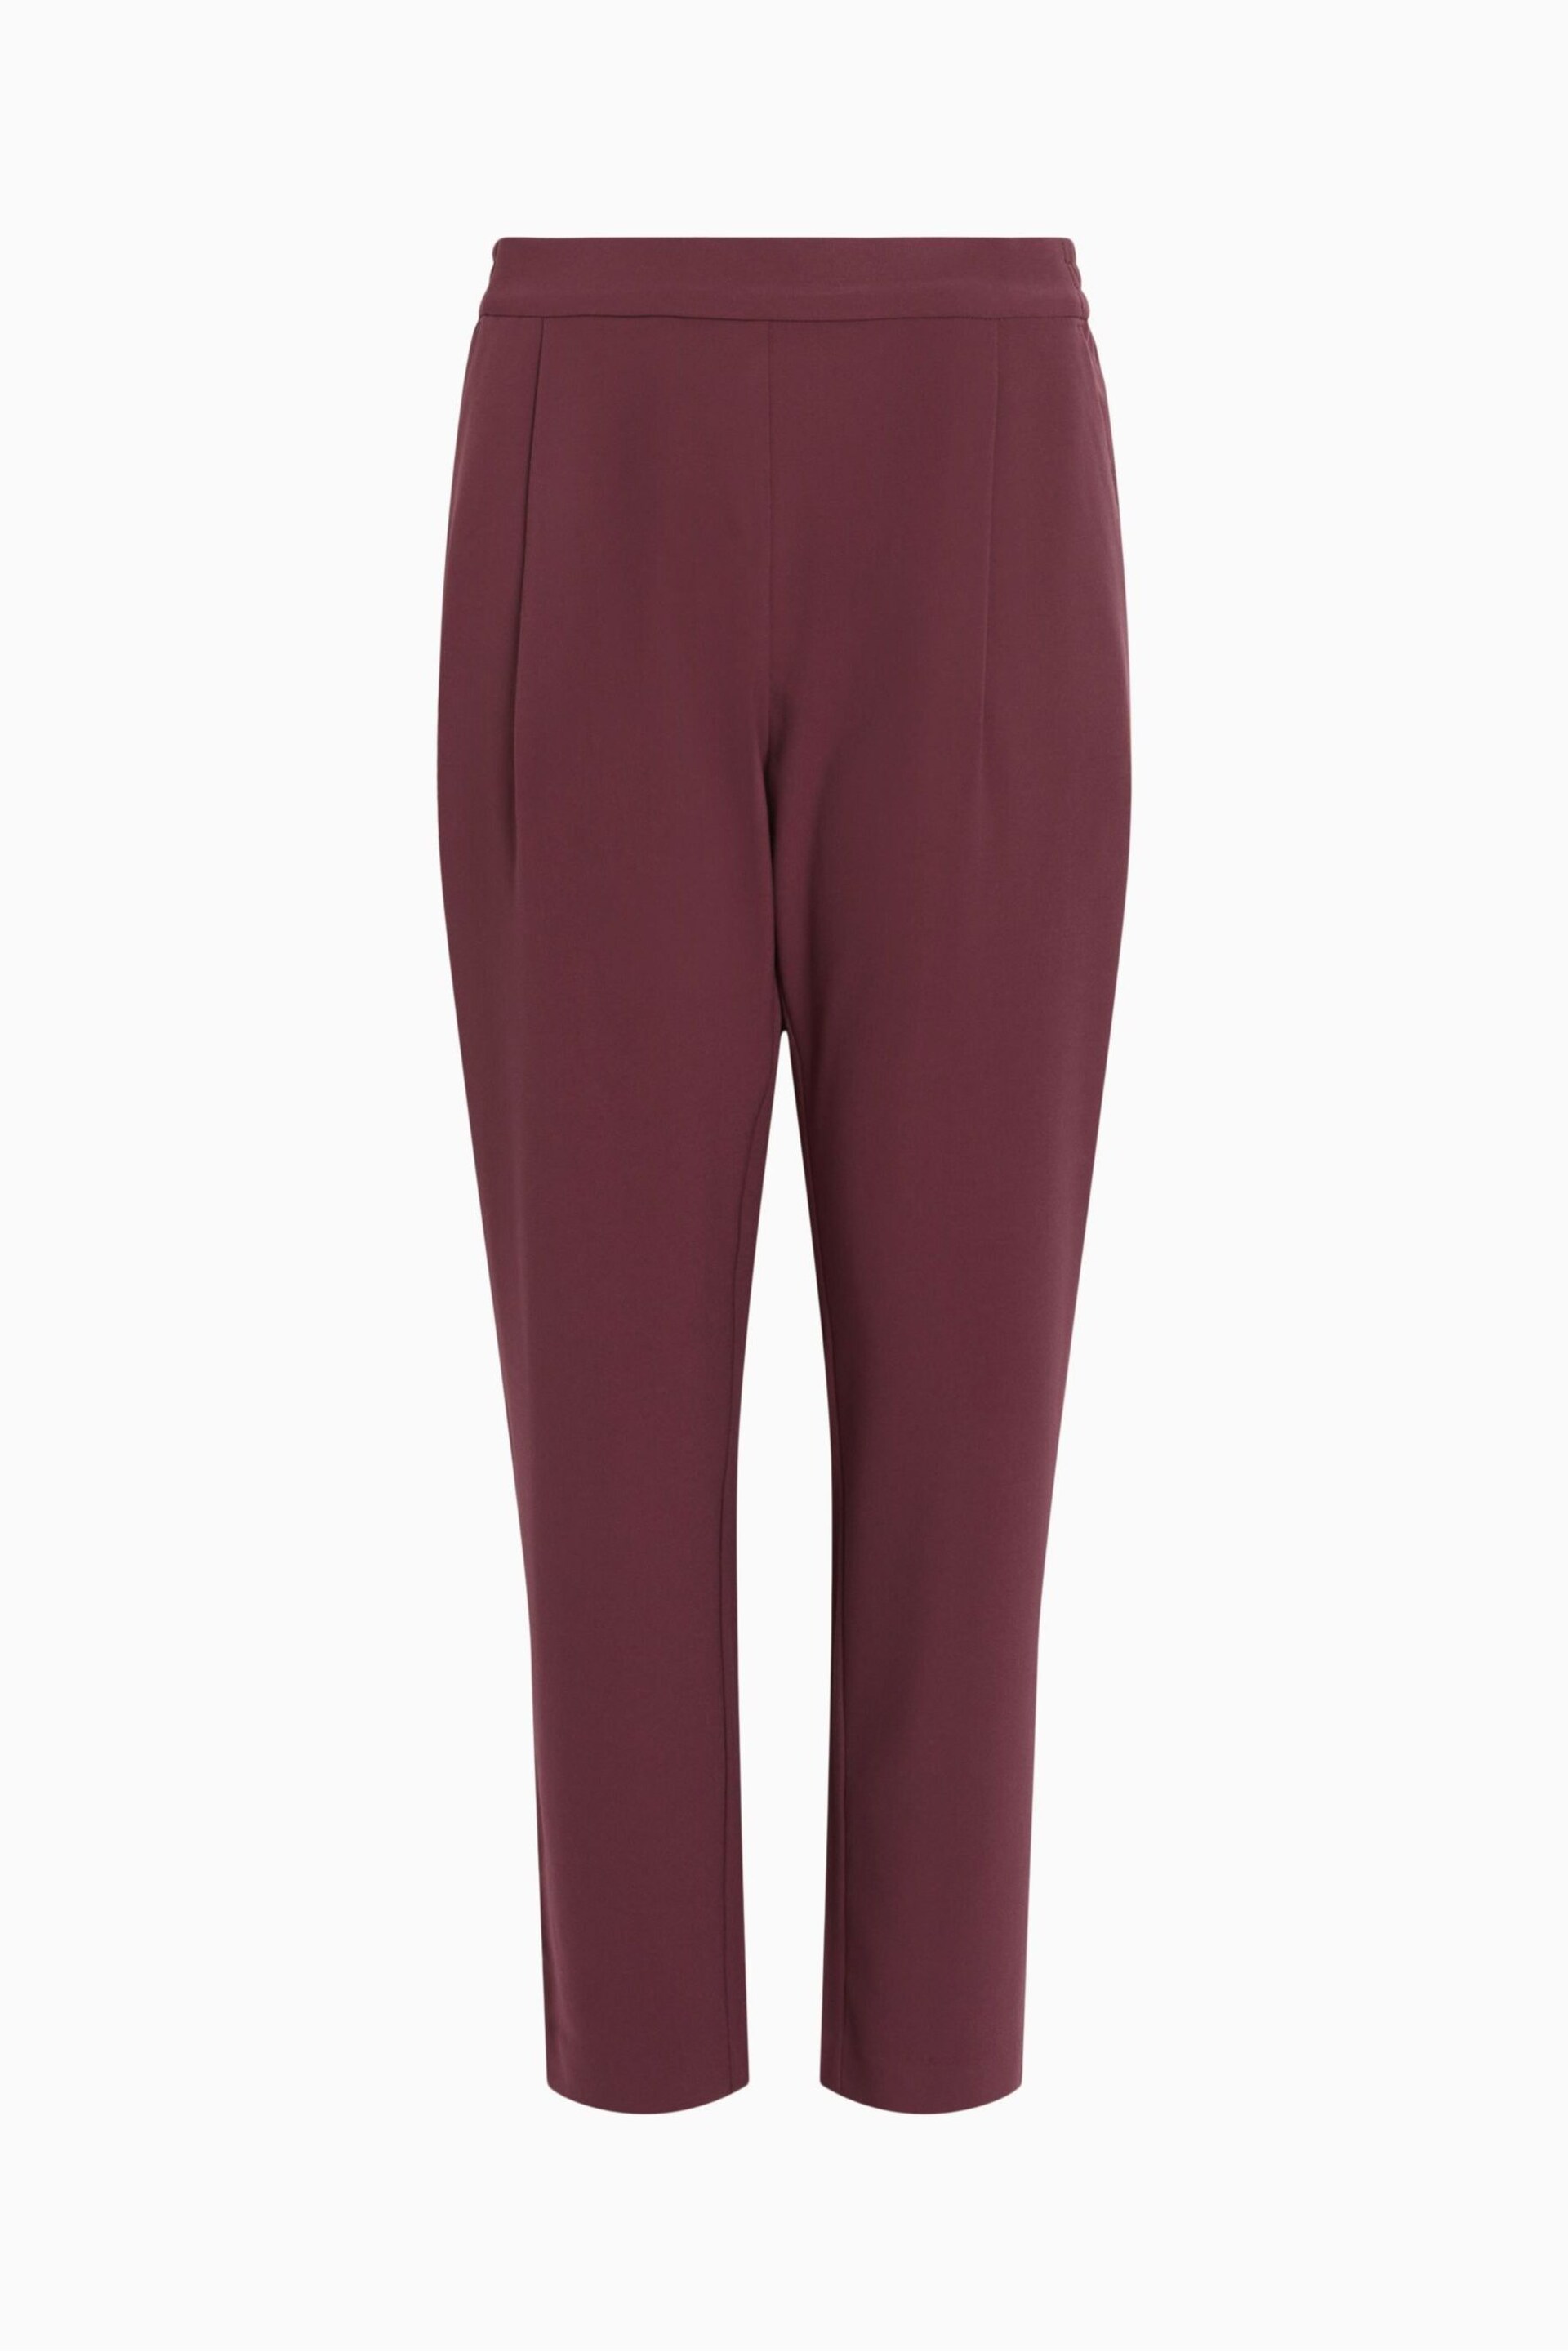 AllSaints Pink Aleida Tri Trousers - Image 6 of 6